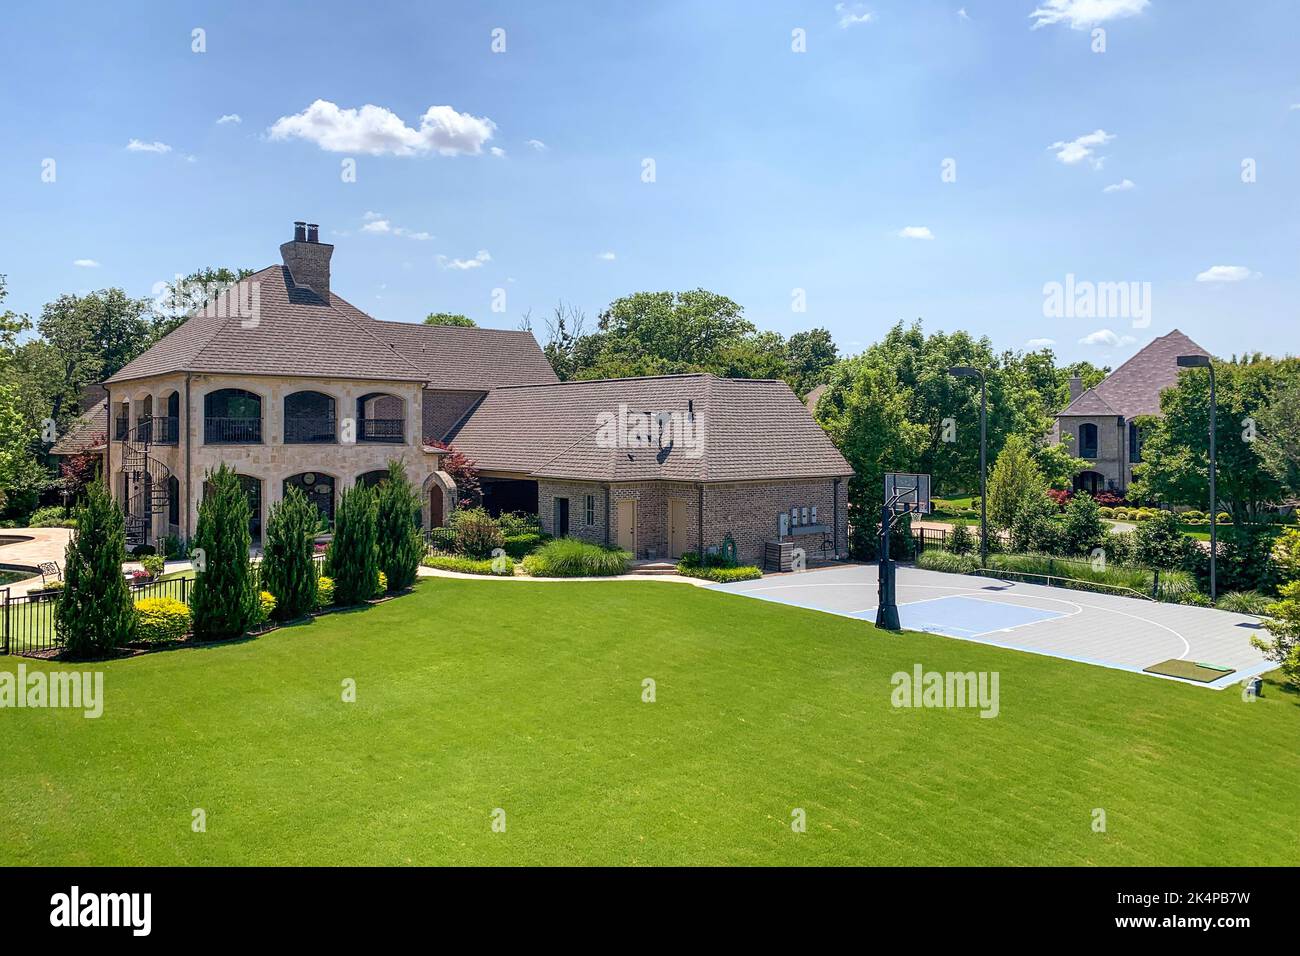 Outdoor shot of luxury house in suburban neighborhood with trees, bushes, lawn and basketball court on the backyard, blue sky background. Real estate concept. Stock Photo